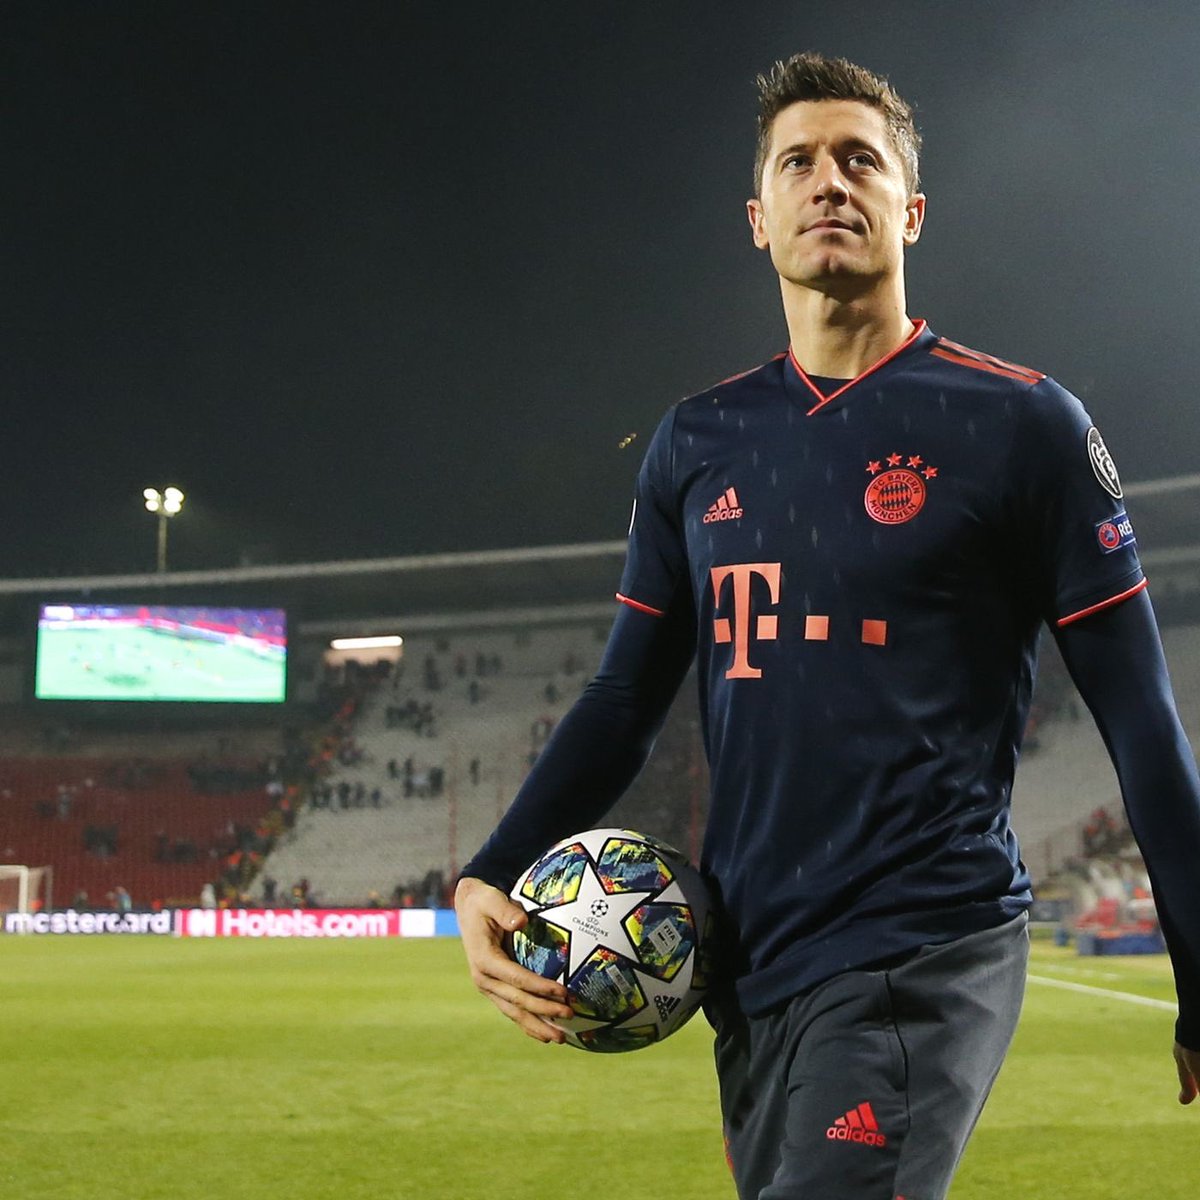 2020 has been Lewandowski’s best year to date.In the 2019/20 season, he managed 55 goals in 47 games, averaging a goal every 74 minutes.Against Red Star Belgrade in Champions League matchday one. Lewy bagged 4 goals in 14mins and 31secs. The quickest CL quadruple in history.